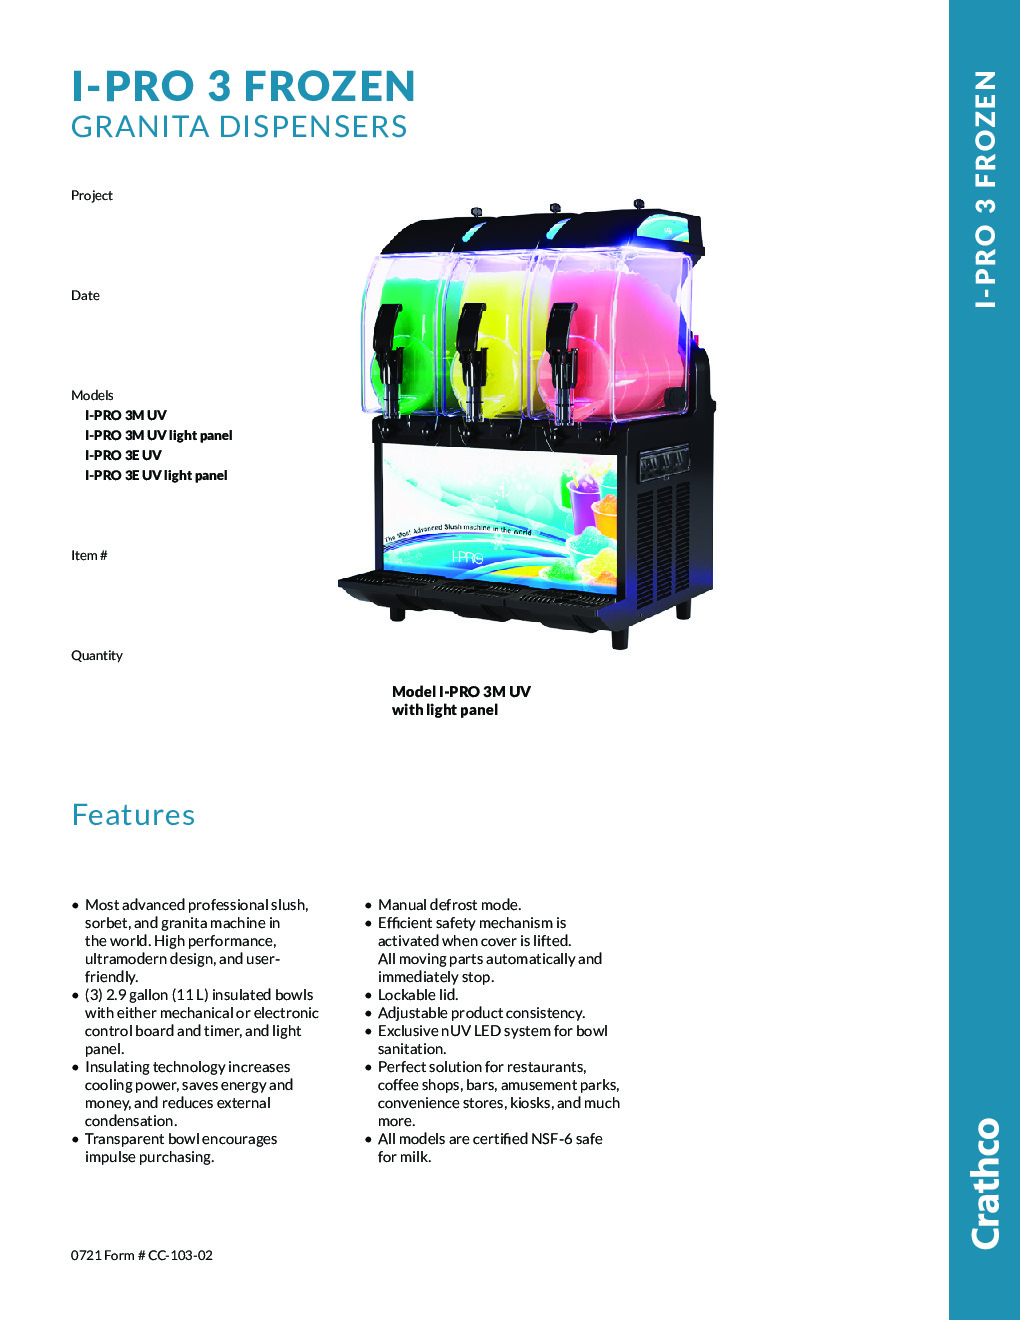 Crathco® I-Pro 3E Frozen Granita Dispenser With Light Panel And Exclusive Nuv Led System For Bowl Sanitation